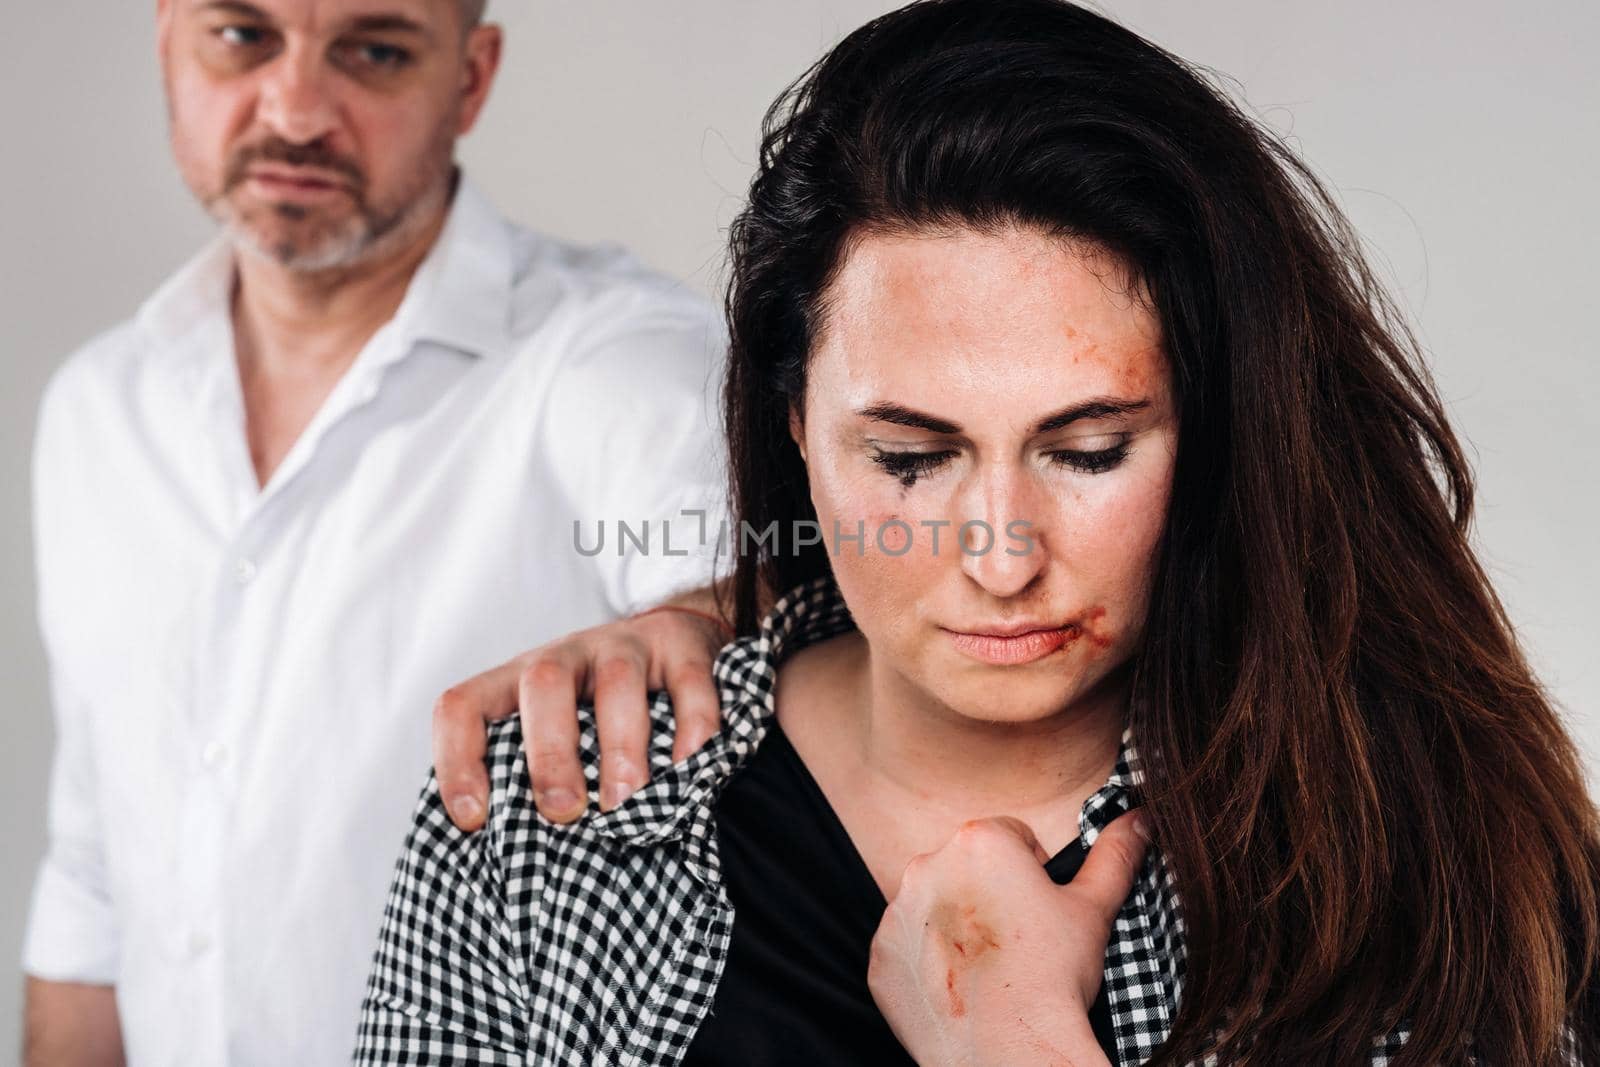 A woman beaten by her husband standing behind her and looking at her aggressively. Domestic violence by Lobachad